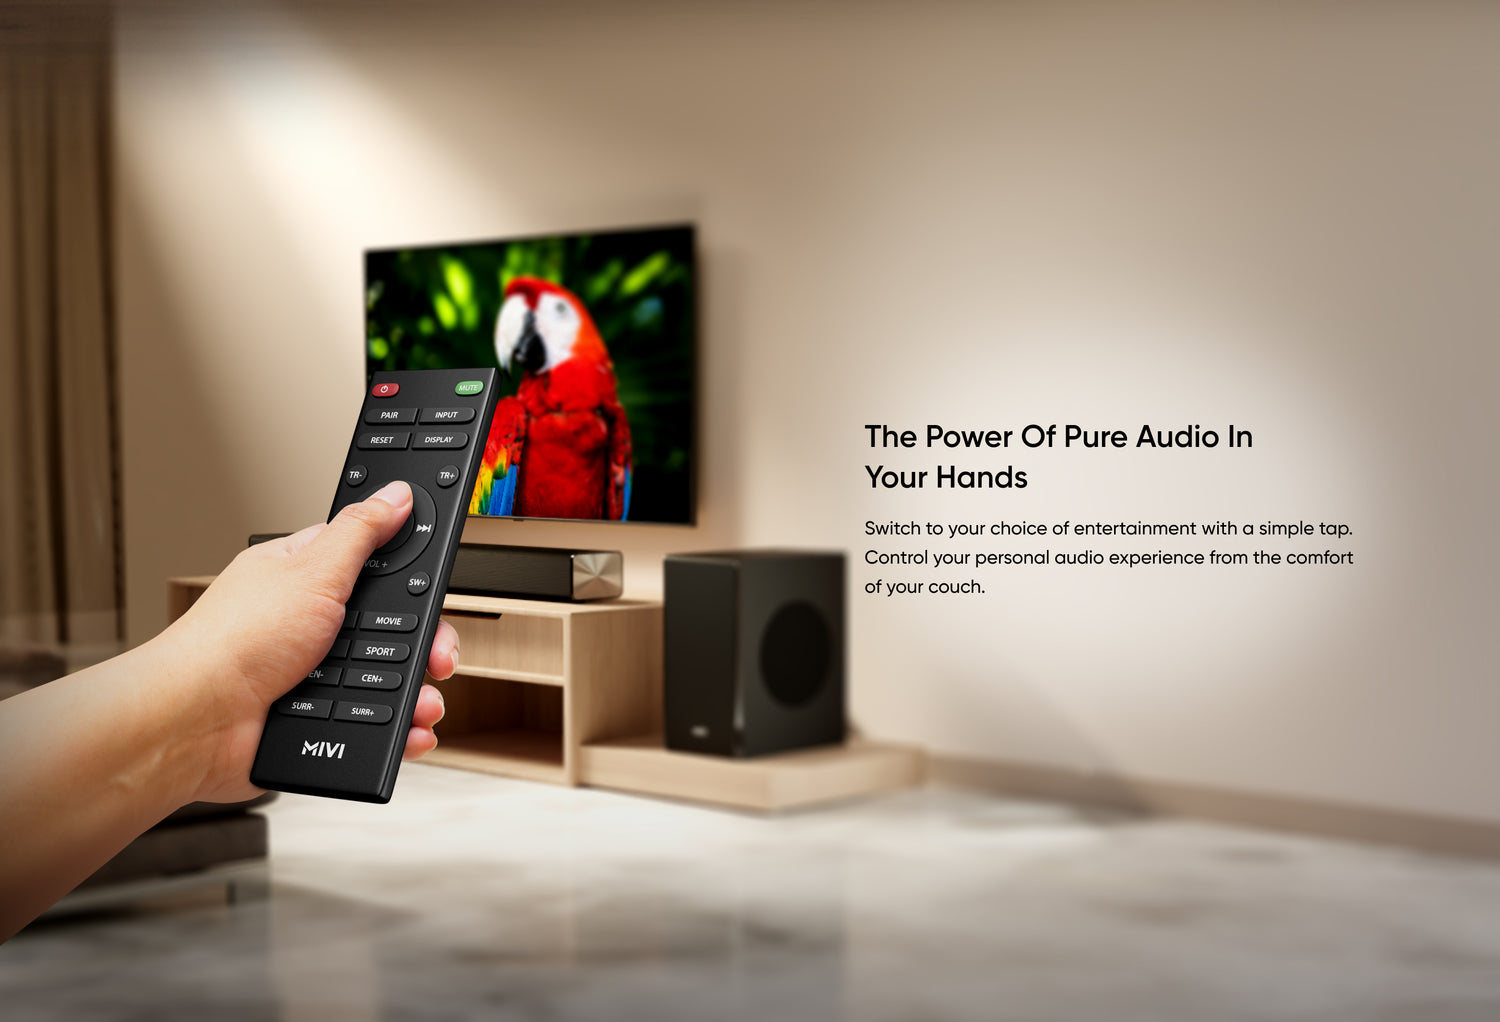 The Power of Pure Audio in Your Hands - Switch to your choice of entertainment with a simple tap. Control your personal audio experience from the comfort of your couch.